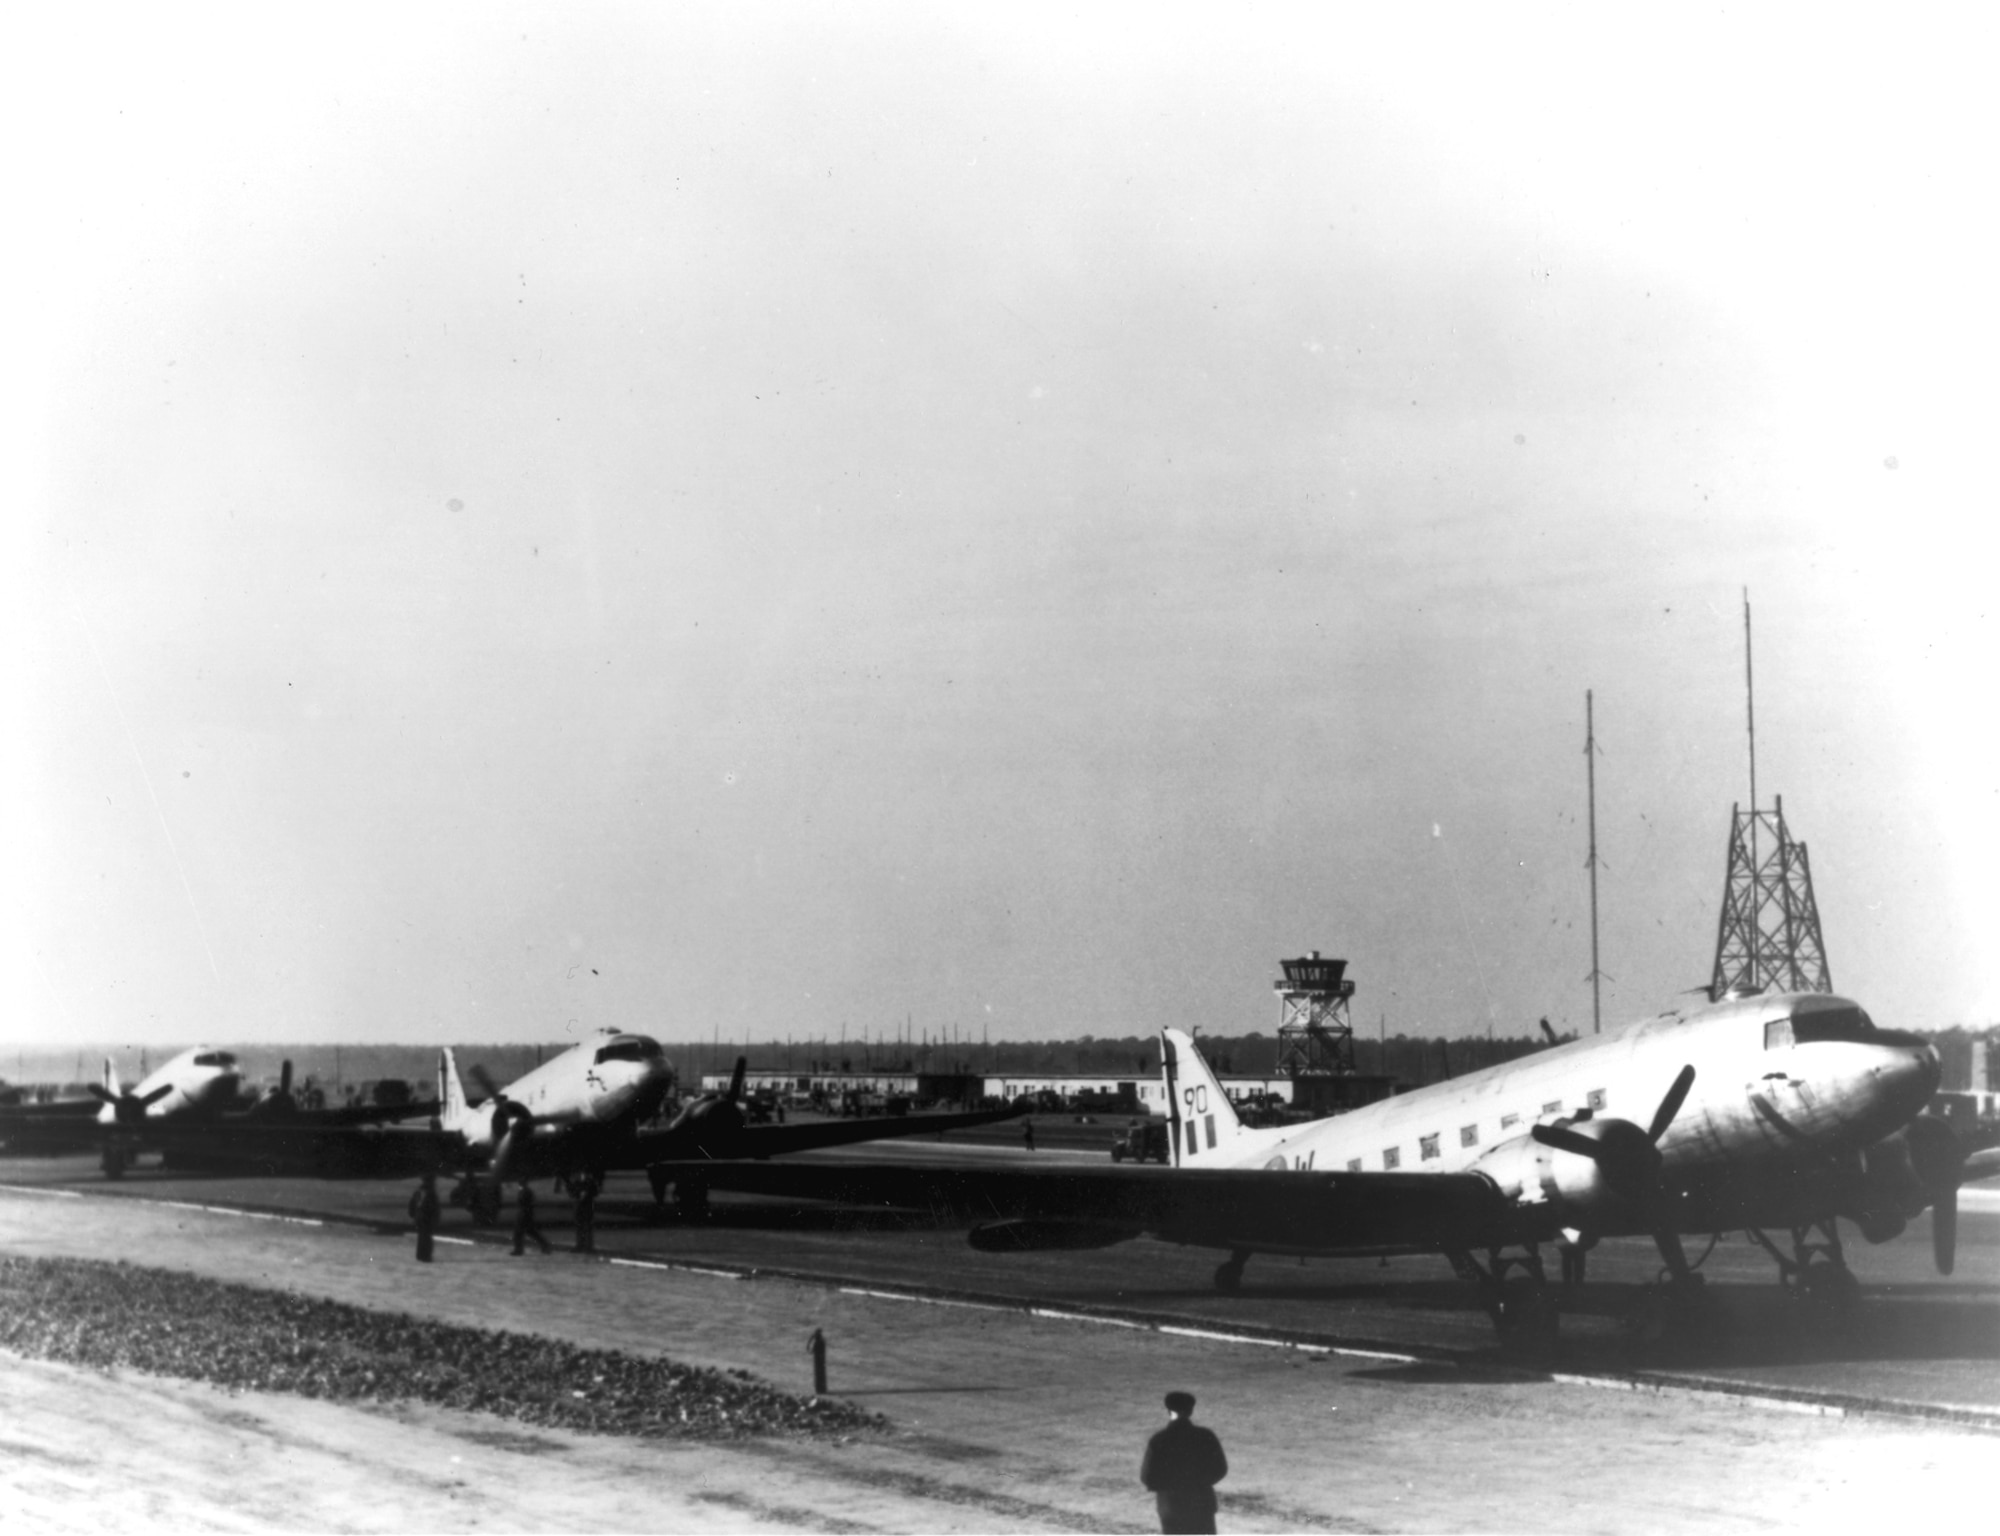 Royal Air Force C-47s being unloaded in the beginning days of flight operations at Tegel. (U.S. Air Force photo)